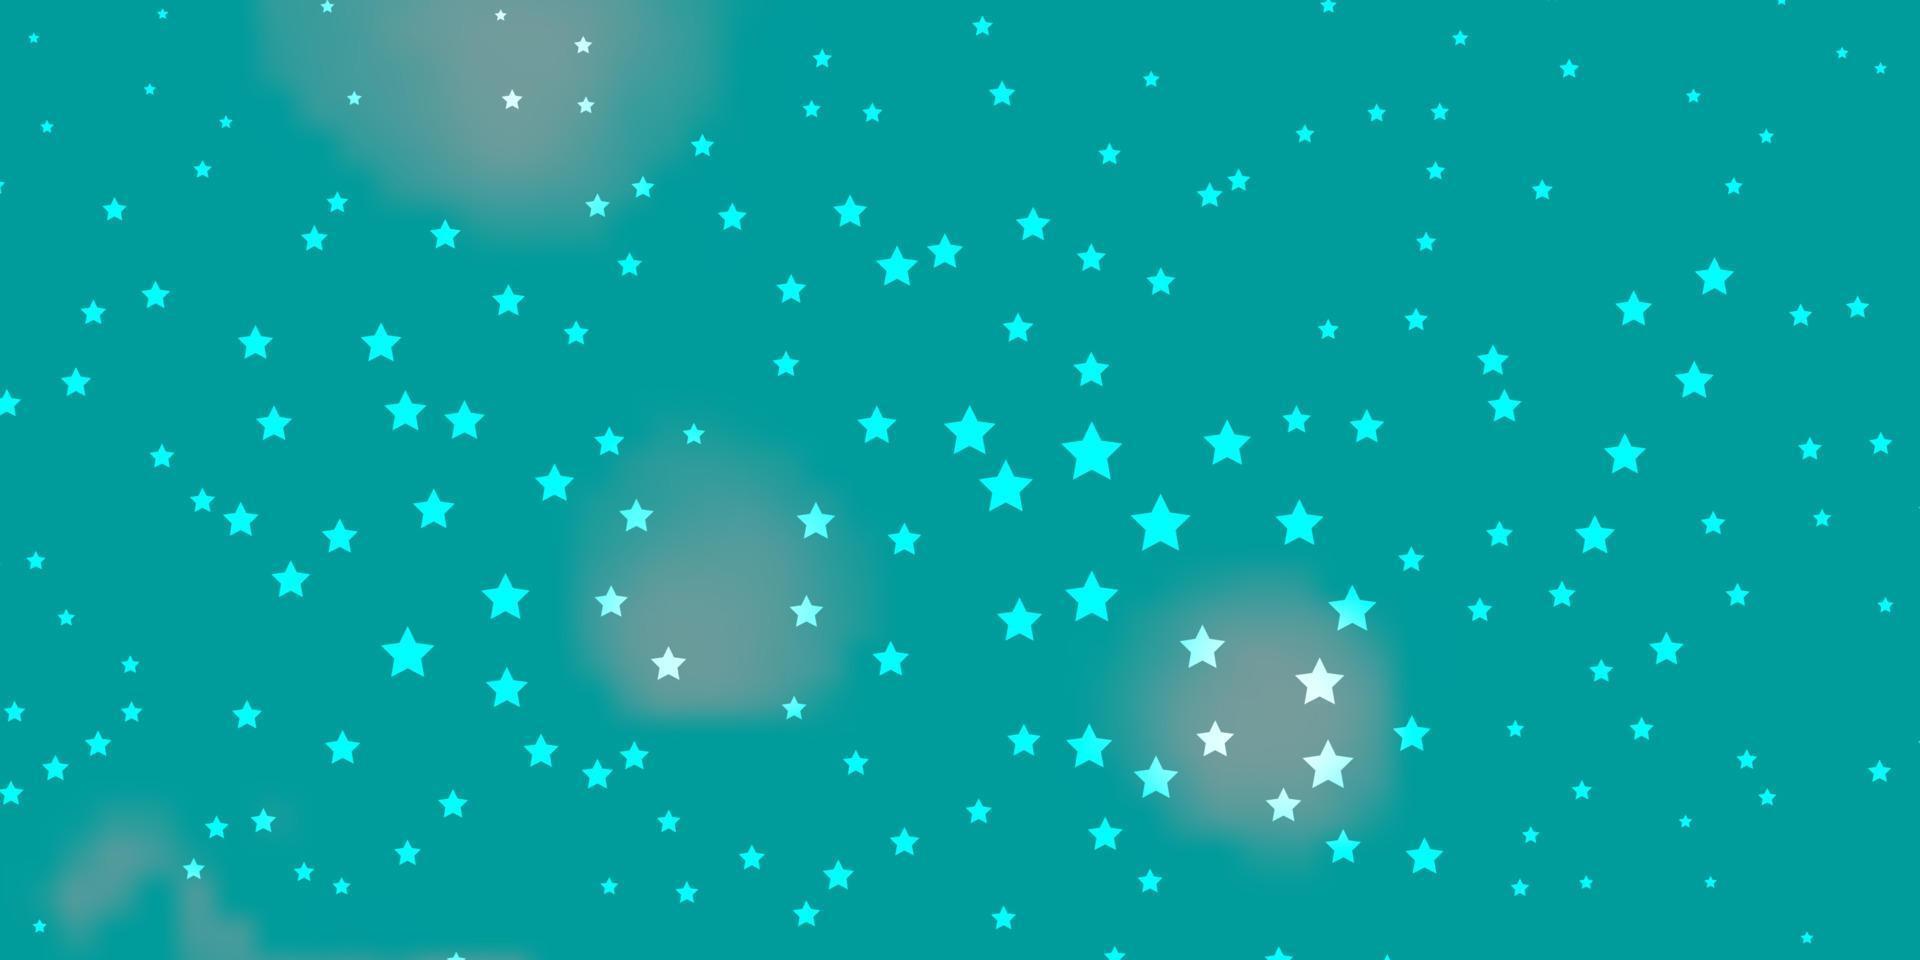 Dark Blue, Green vector background with small and big stars.